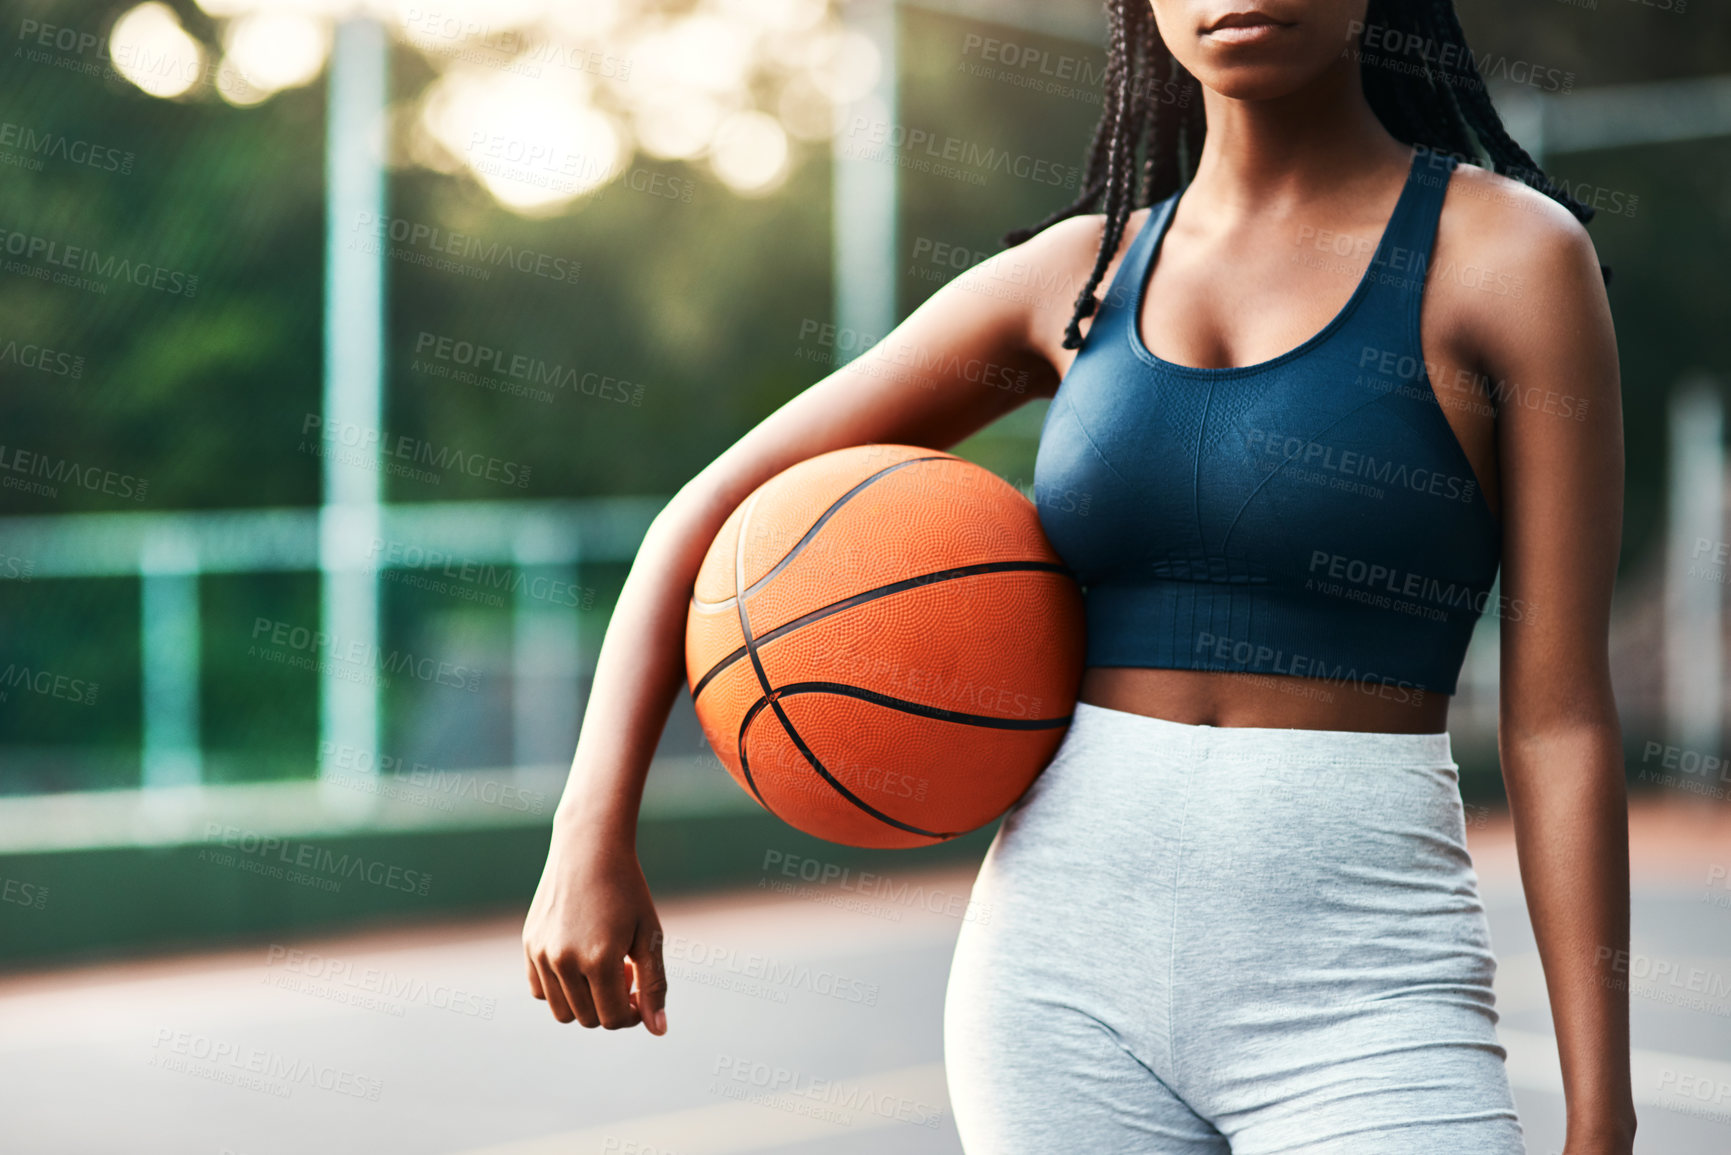 Buy stock photo Cropped shot of an unrecognizable sportswoman standing on the court alone and holding a basketball during the day